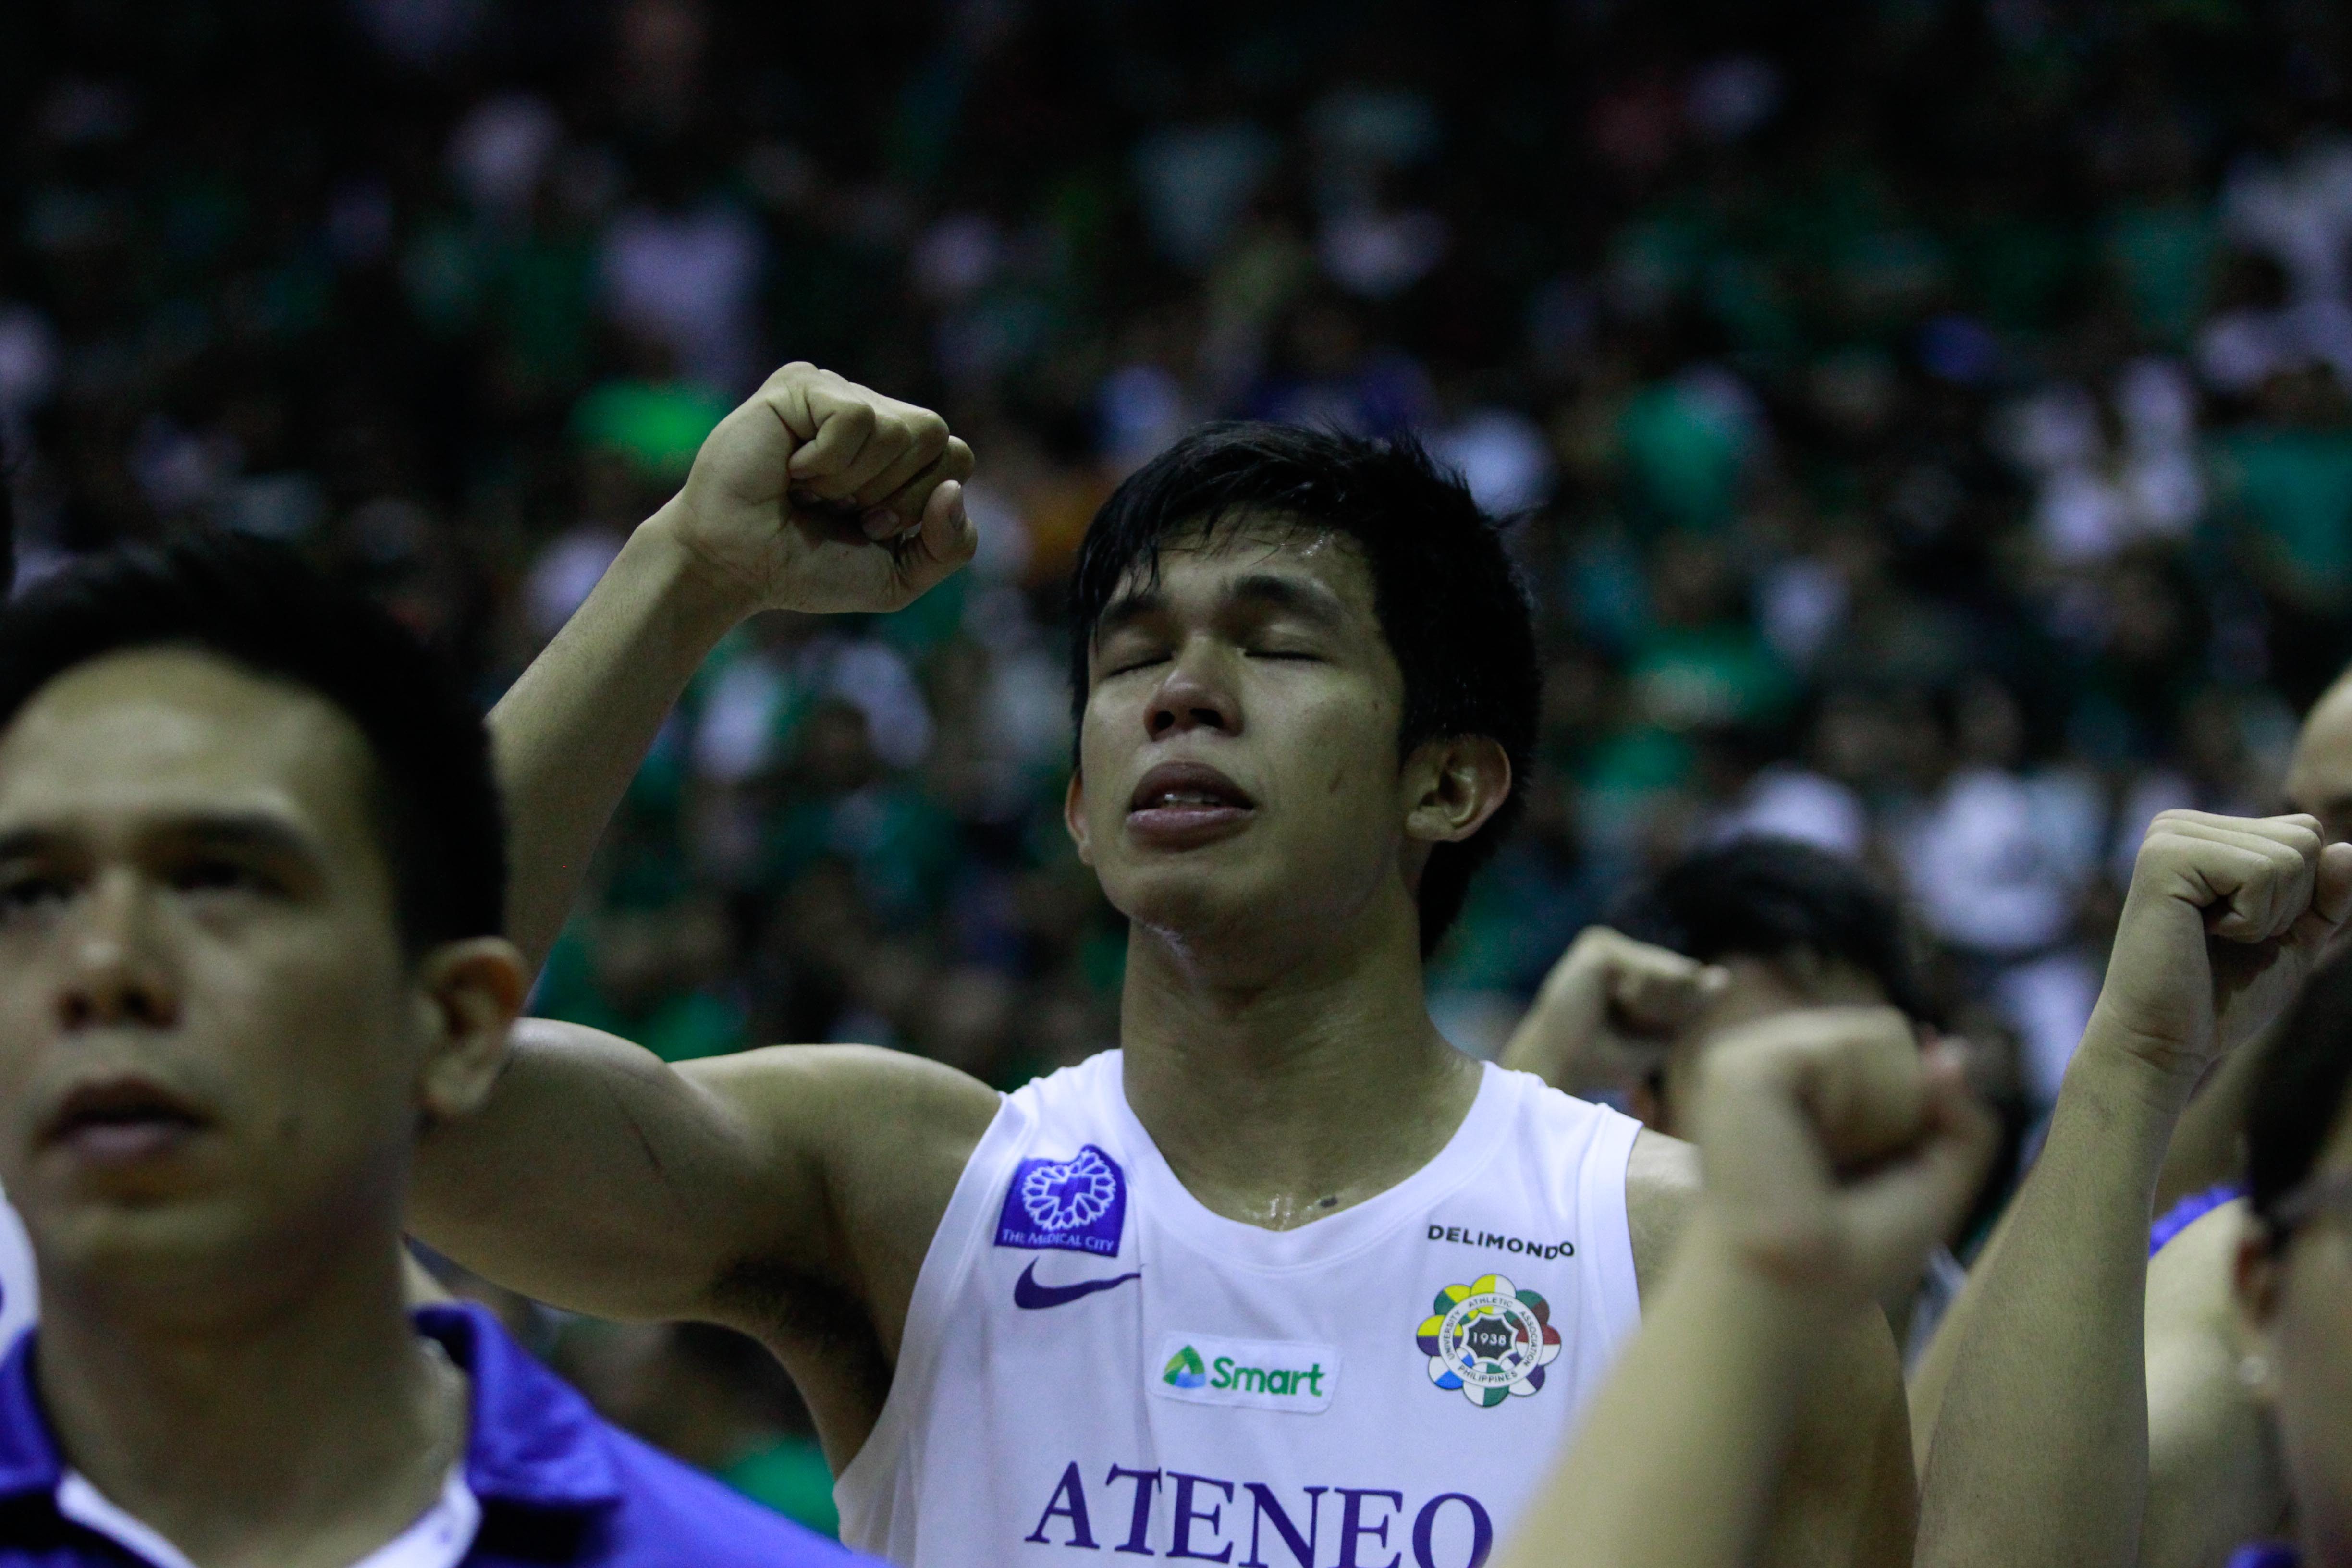 HEARTBROKEN. Thirdy Ravena could not hold back his tears after the loss. Photo by Eduardo Solo/Rappler 